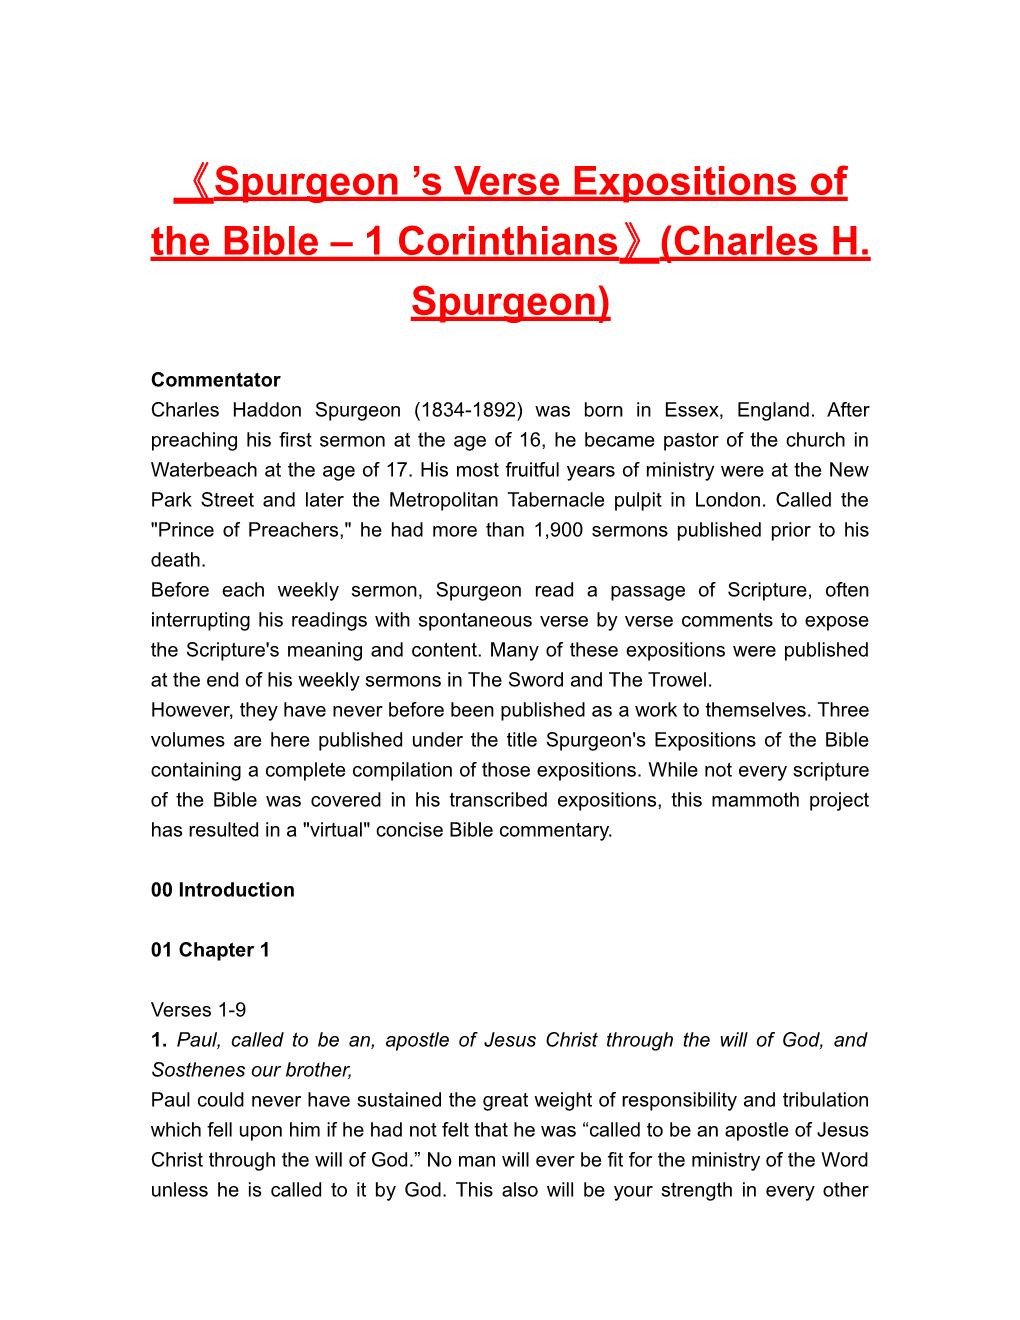 Spurgeon S Verse Expositions of the Bible 1 Corinthians (Charles H. Spurgeon)